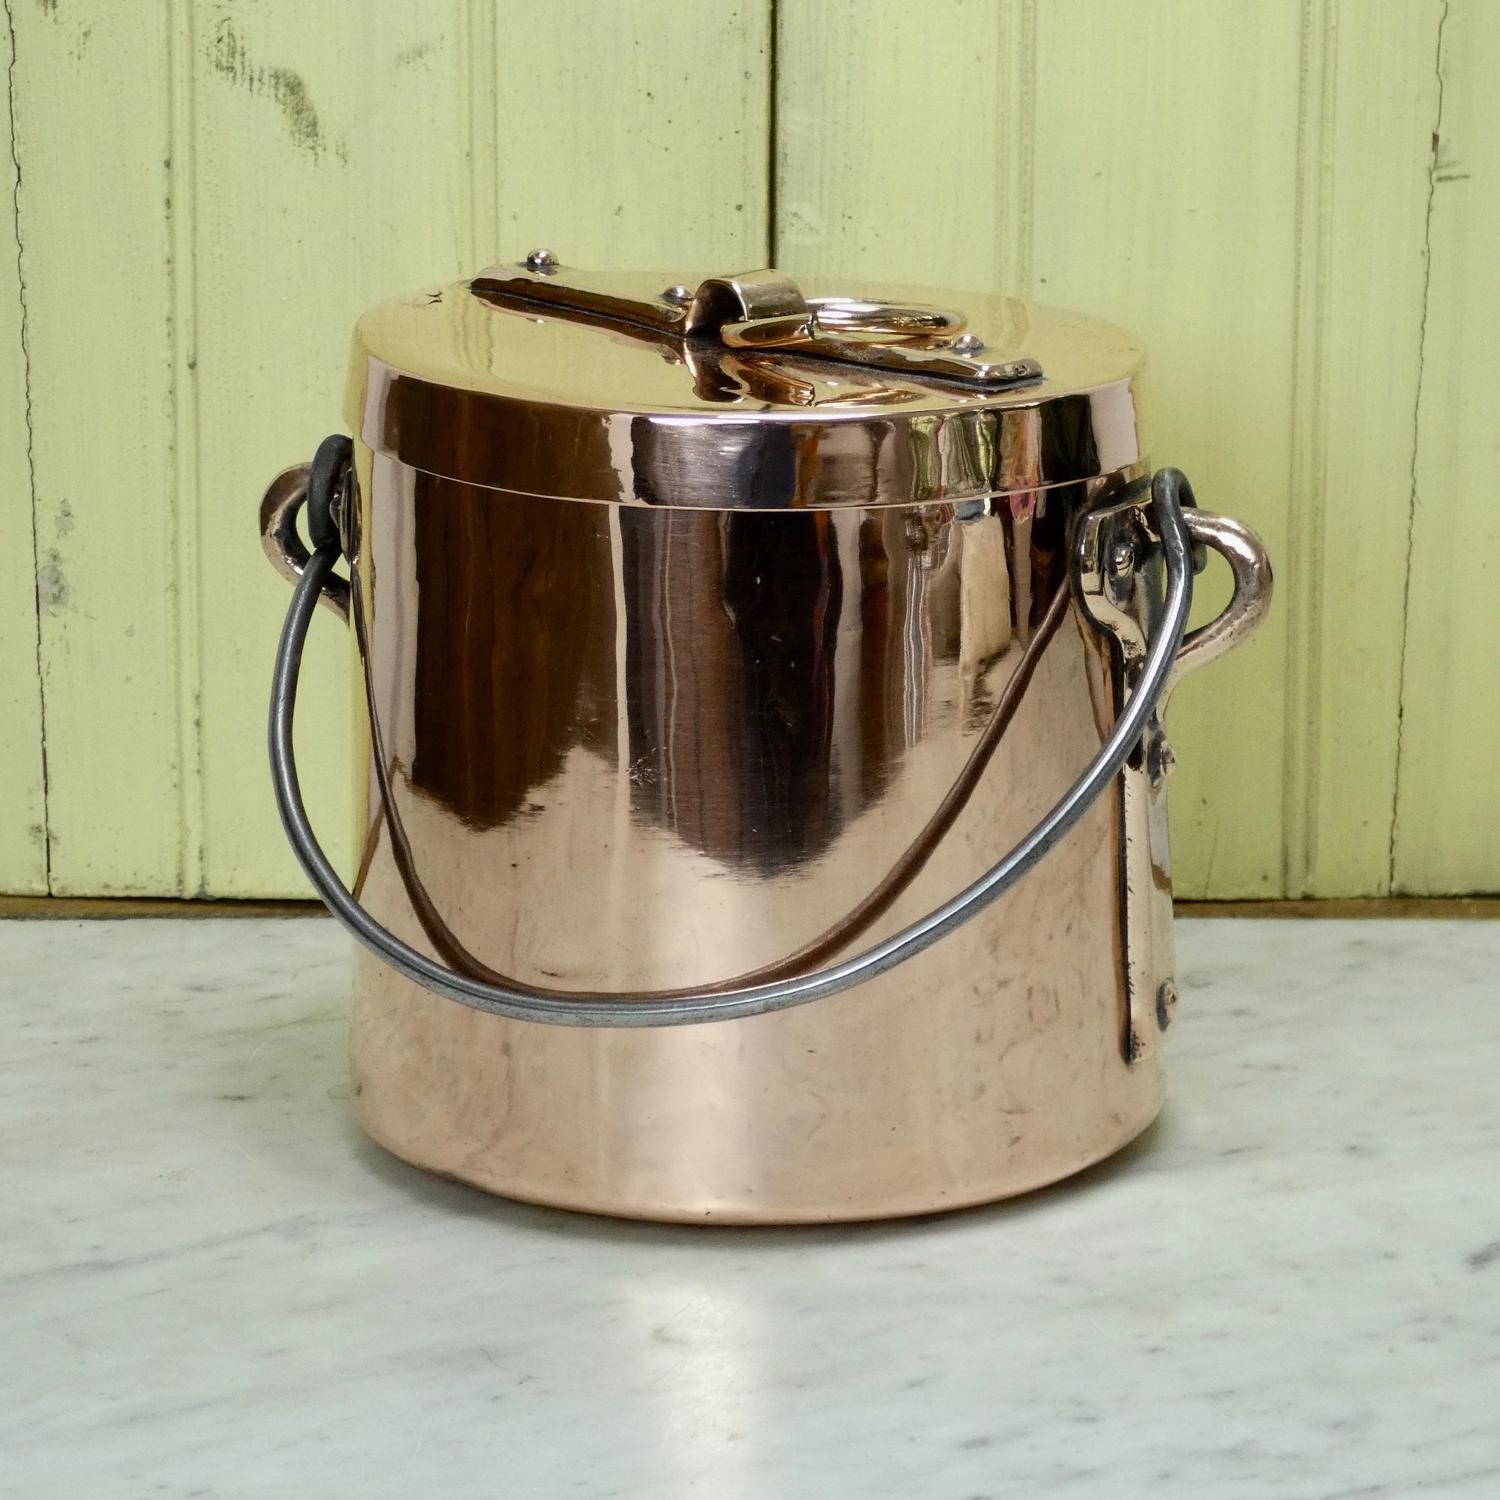 Small, French stockpot